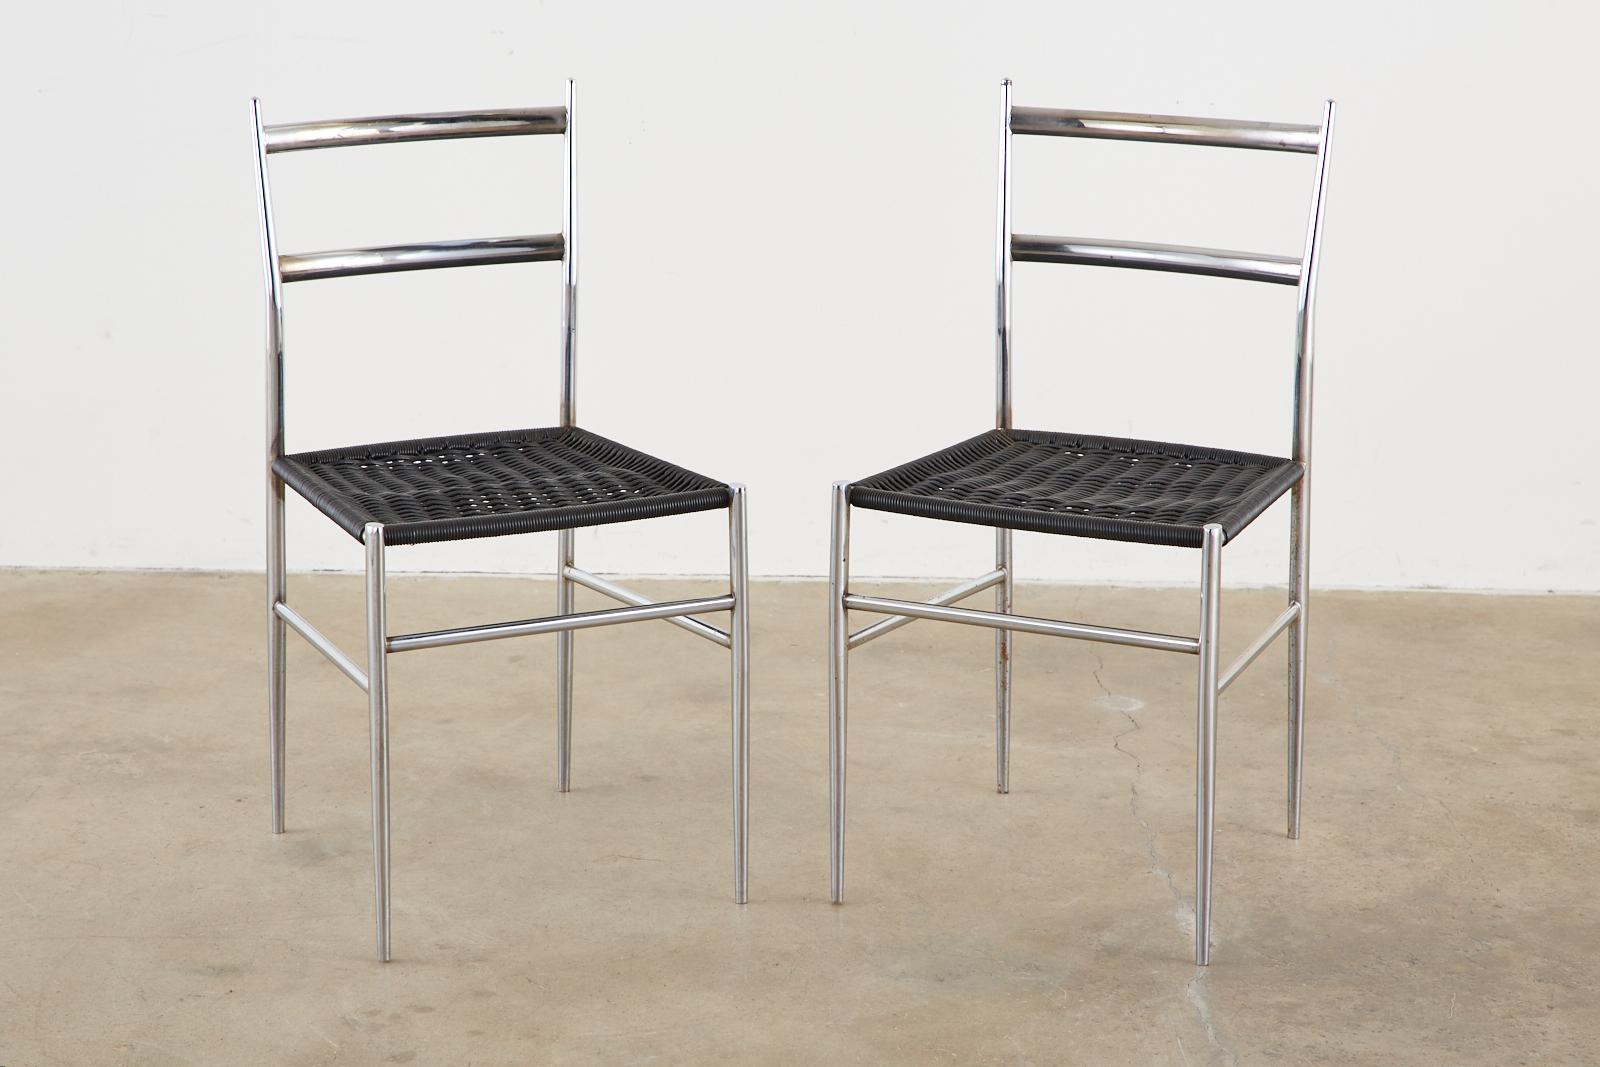 Set of Four Chrome Dining Chairs, style of Gio Ponti's 